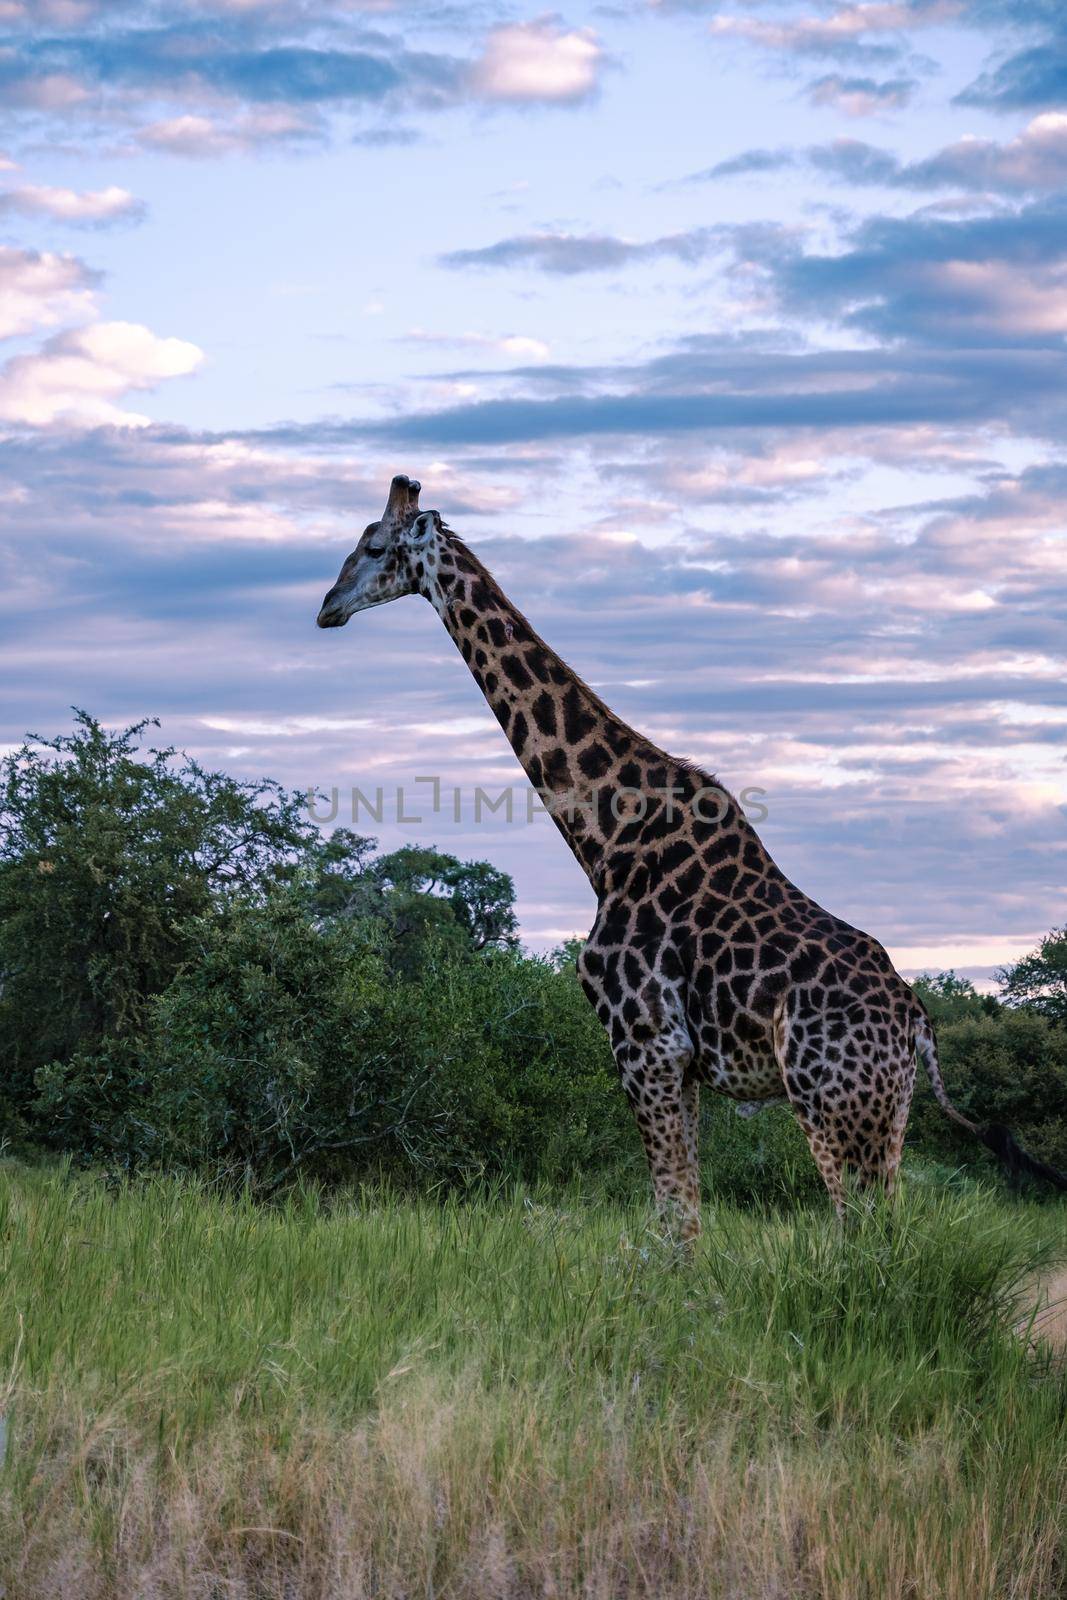 Giraffe at a Savannah landscape during sunset in South Africa at The Klaserie Private Nature Reserve inside the Kruger national park South Africa. Giraffe by a tree in the bush